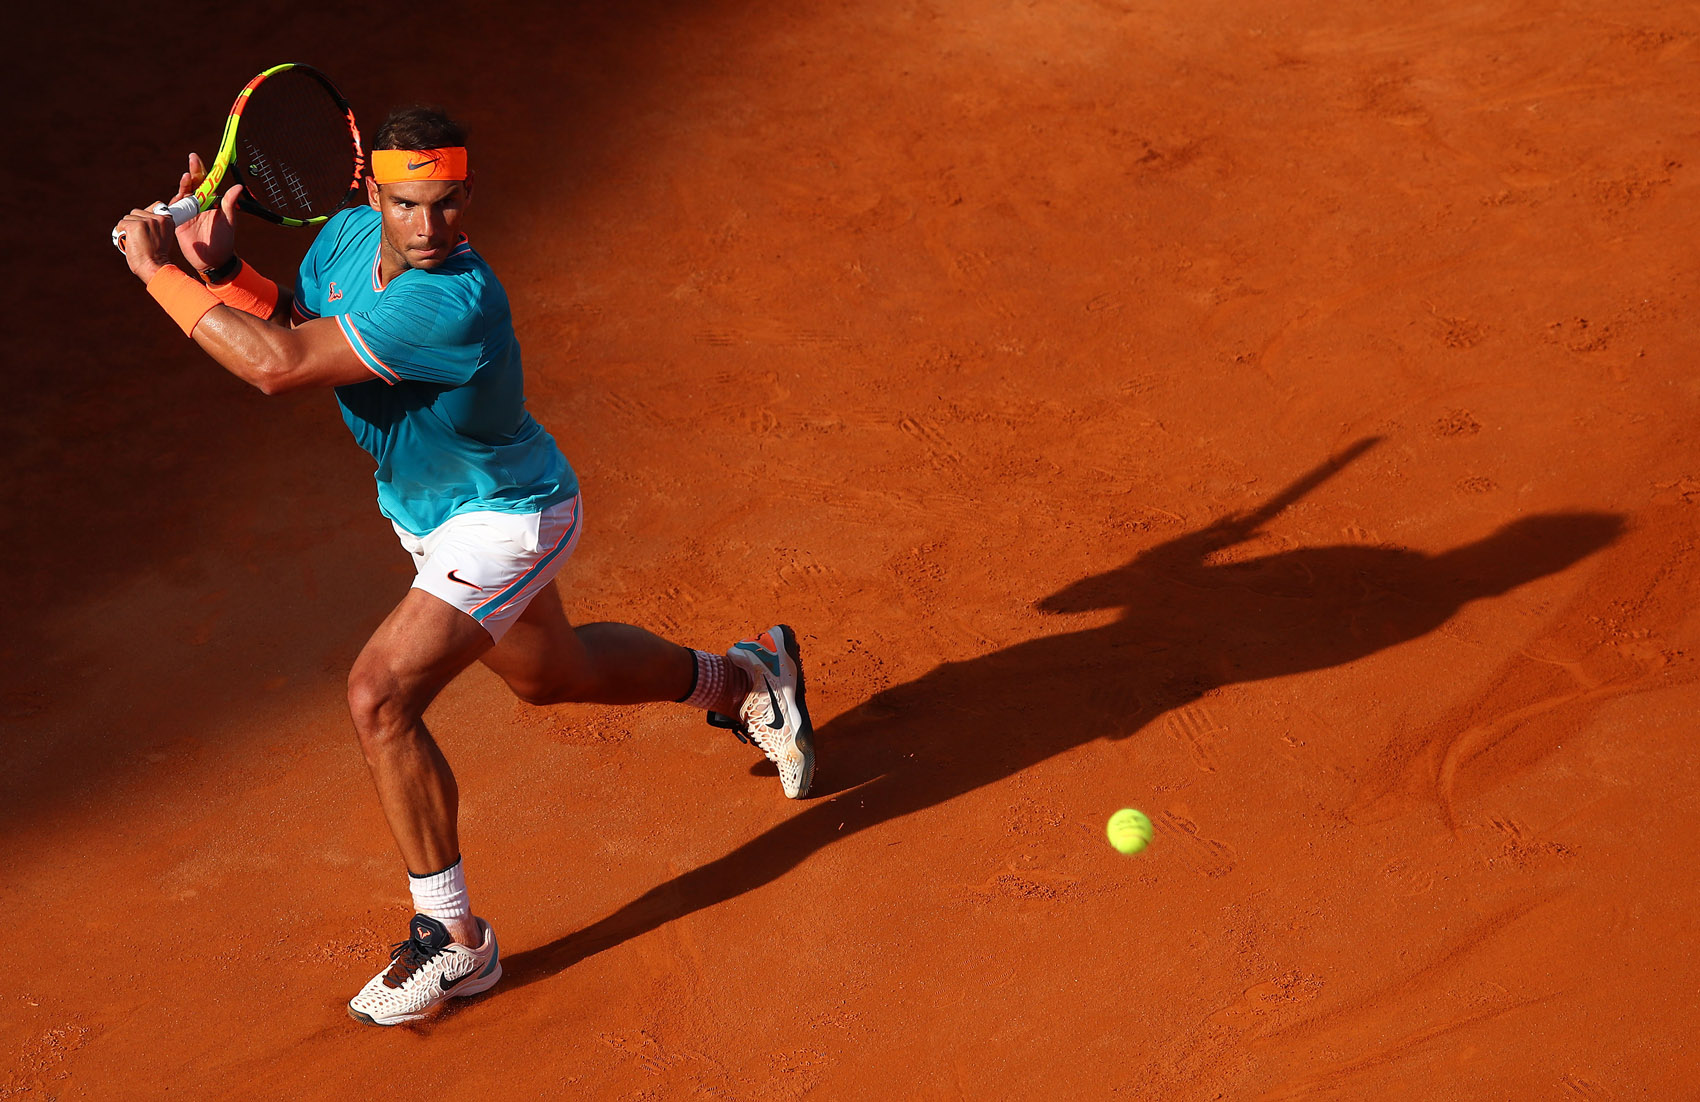 What is the Muller-Weiss syndrome that Nadal suffers from